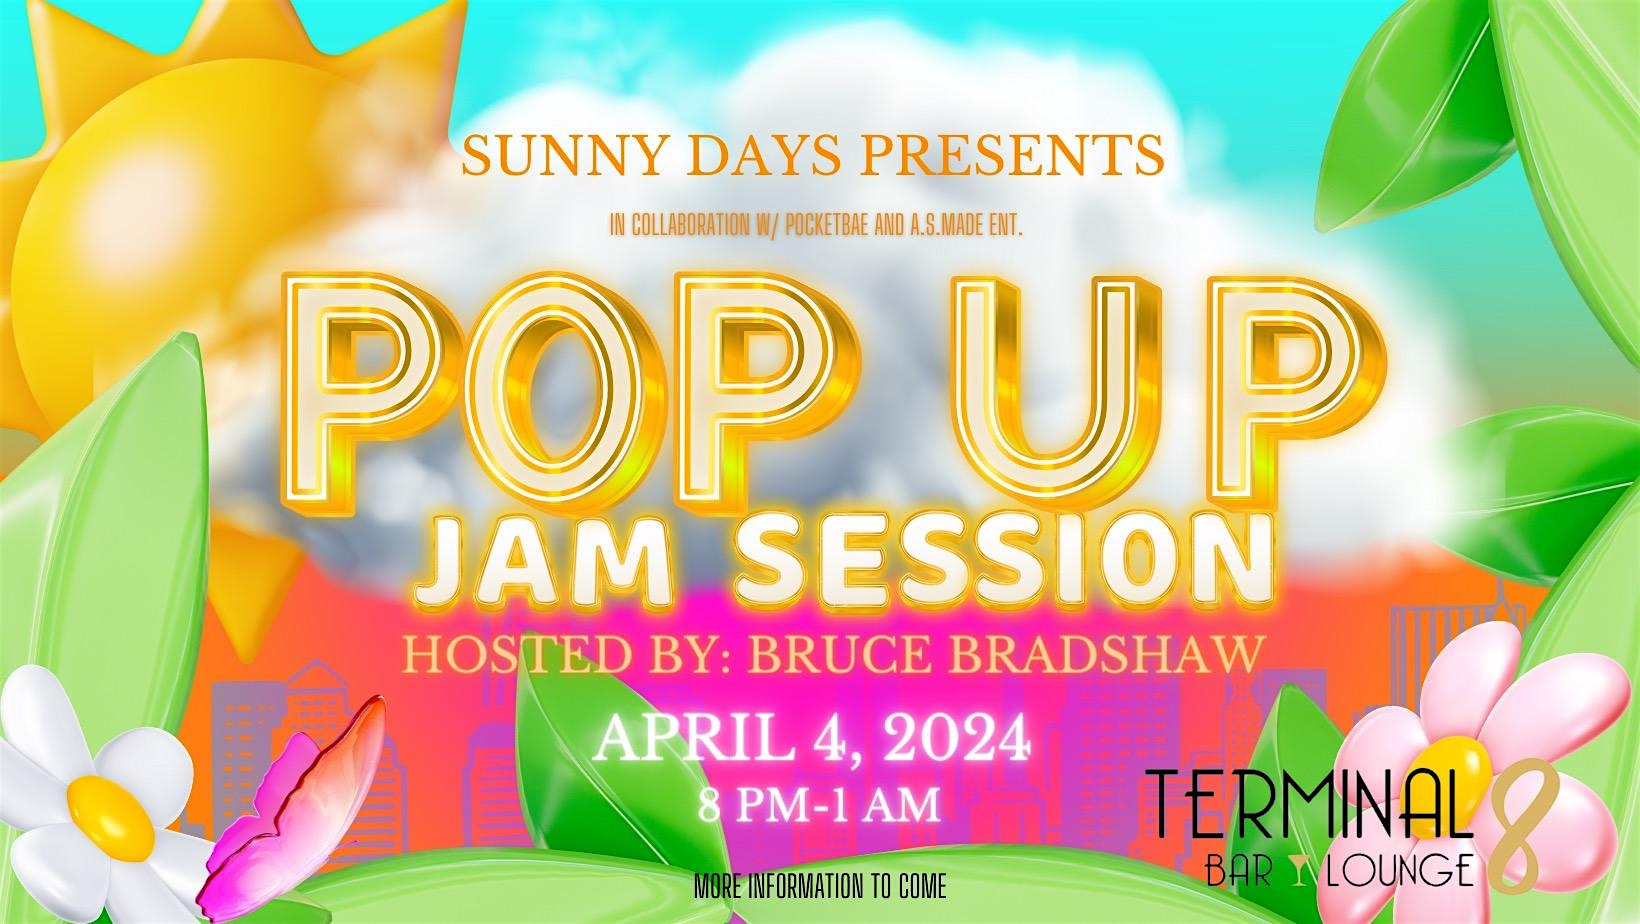 SUNNY DAYS PRESENTS POP UP JAM SESSION DREAMVILLE EDITION